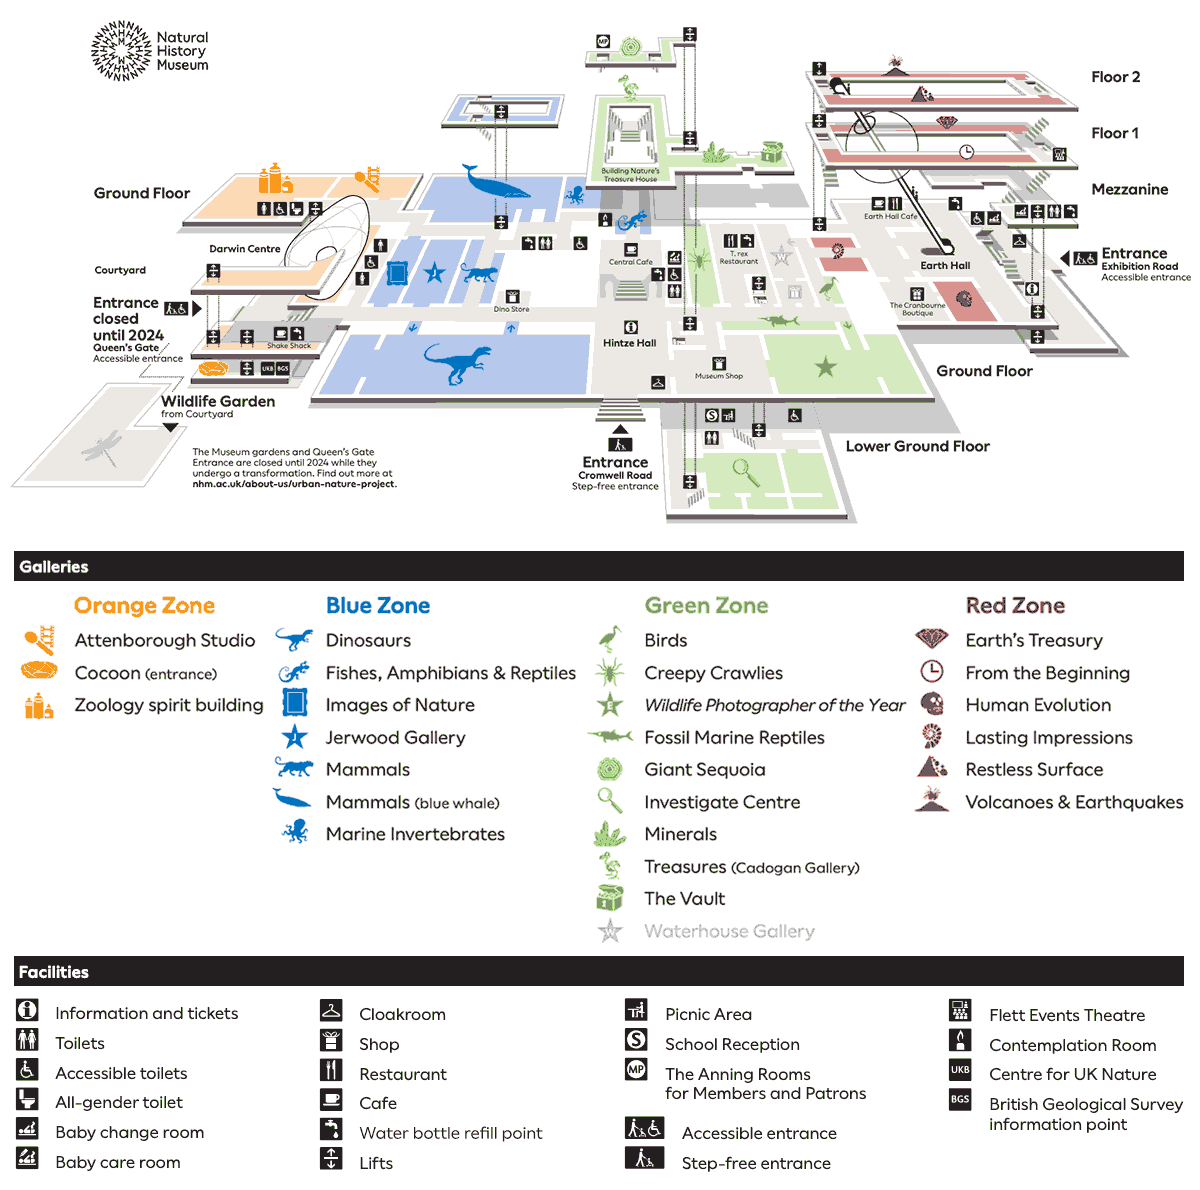 Map of Natural History Museum, London - Image courtesy of Natural History Museum official website https://www.nhm.ac.uk/